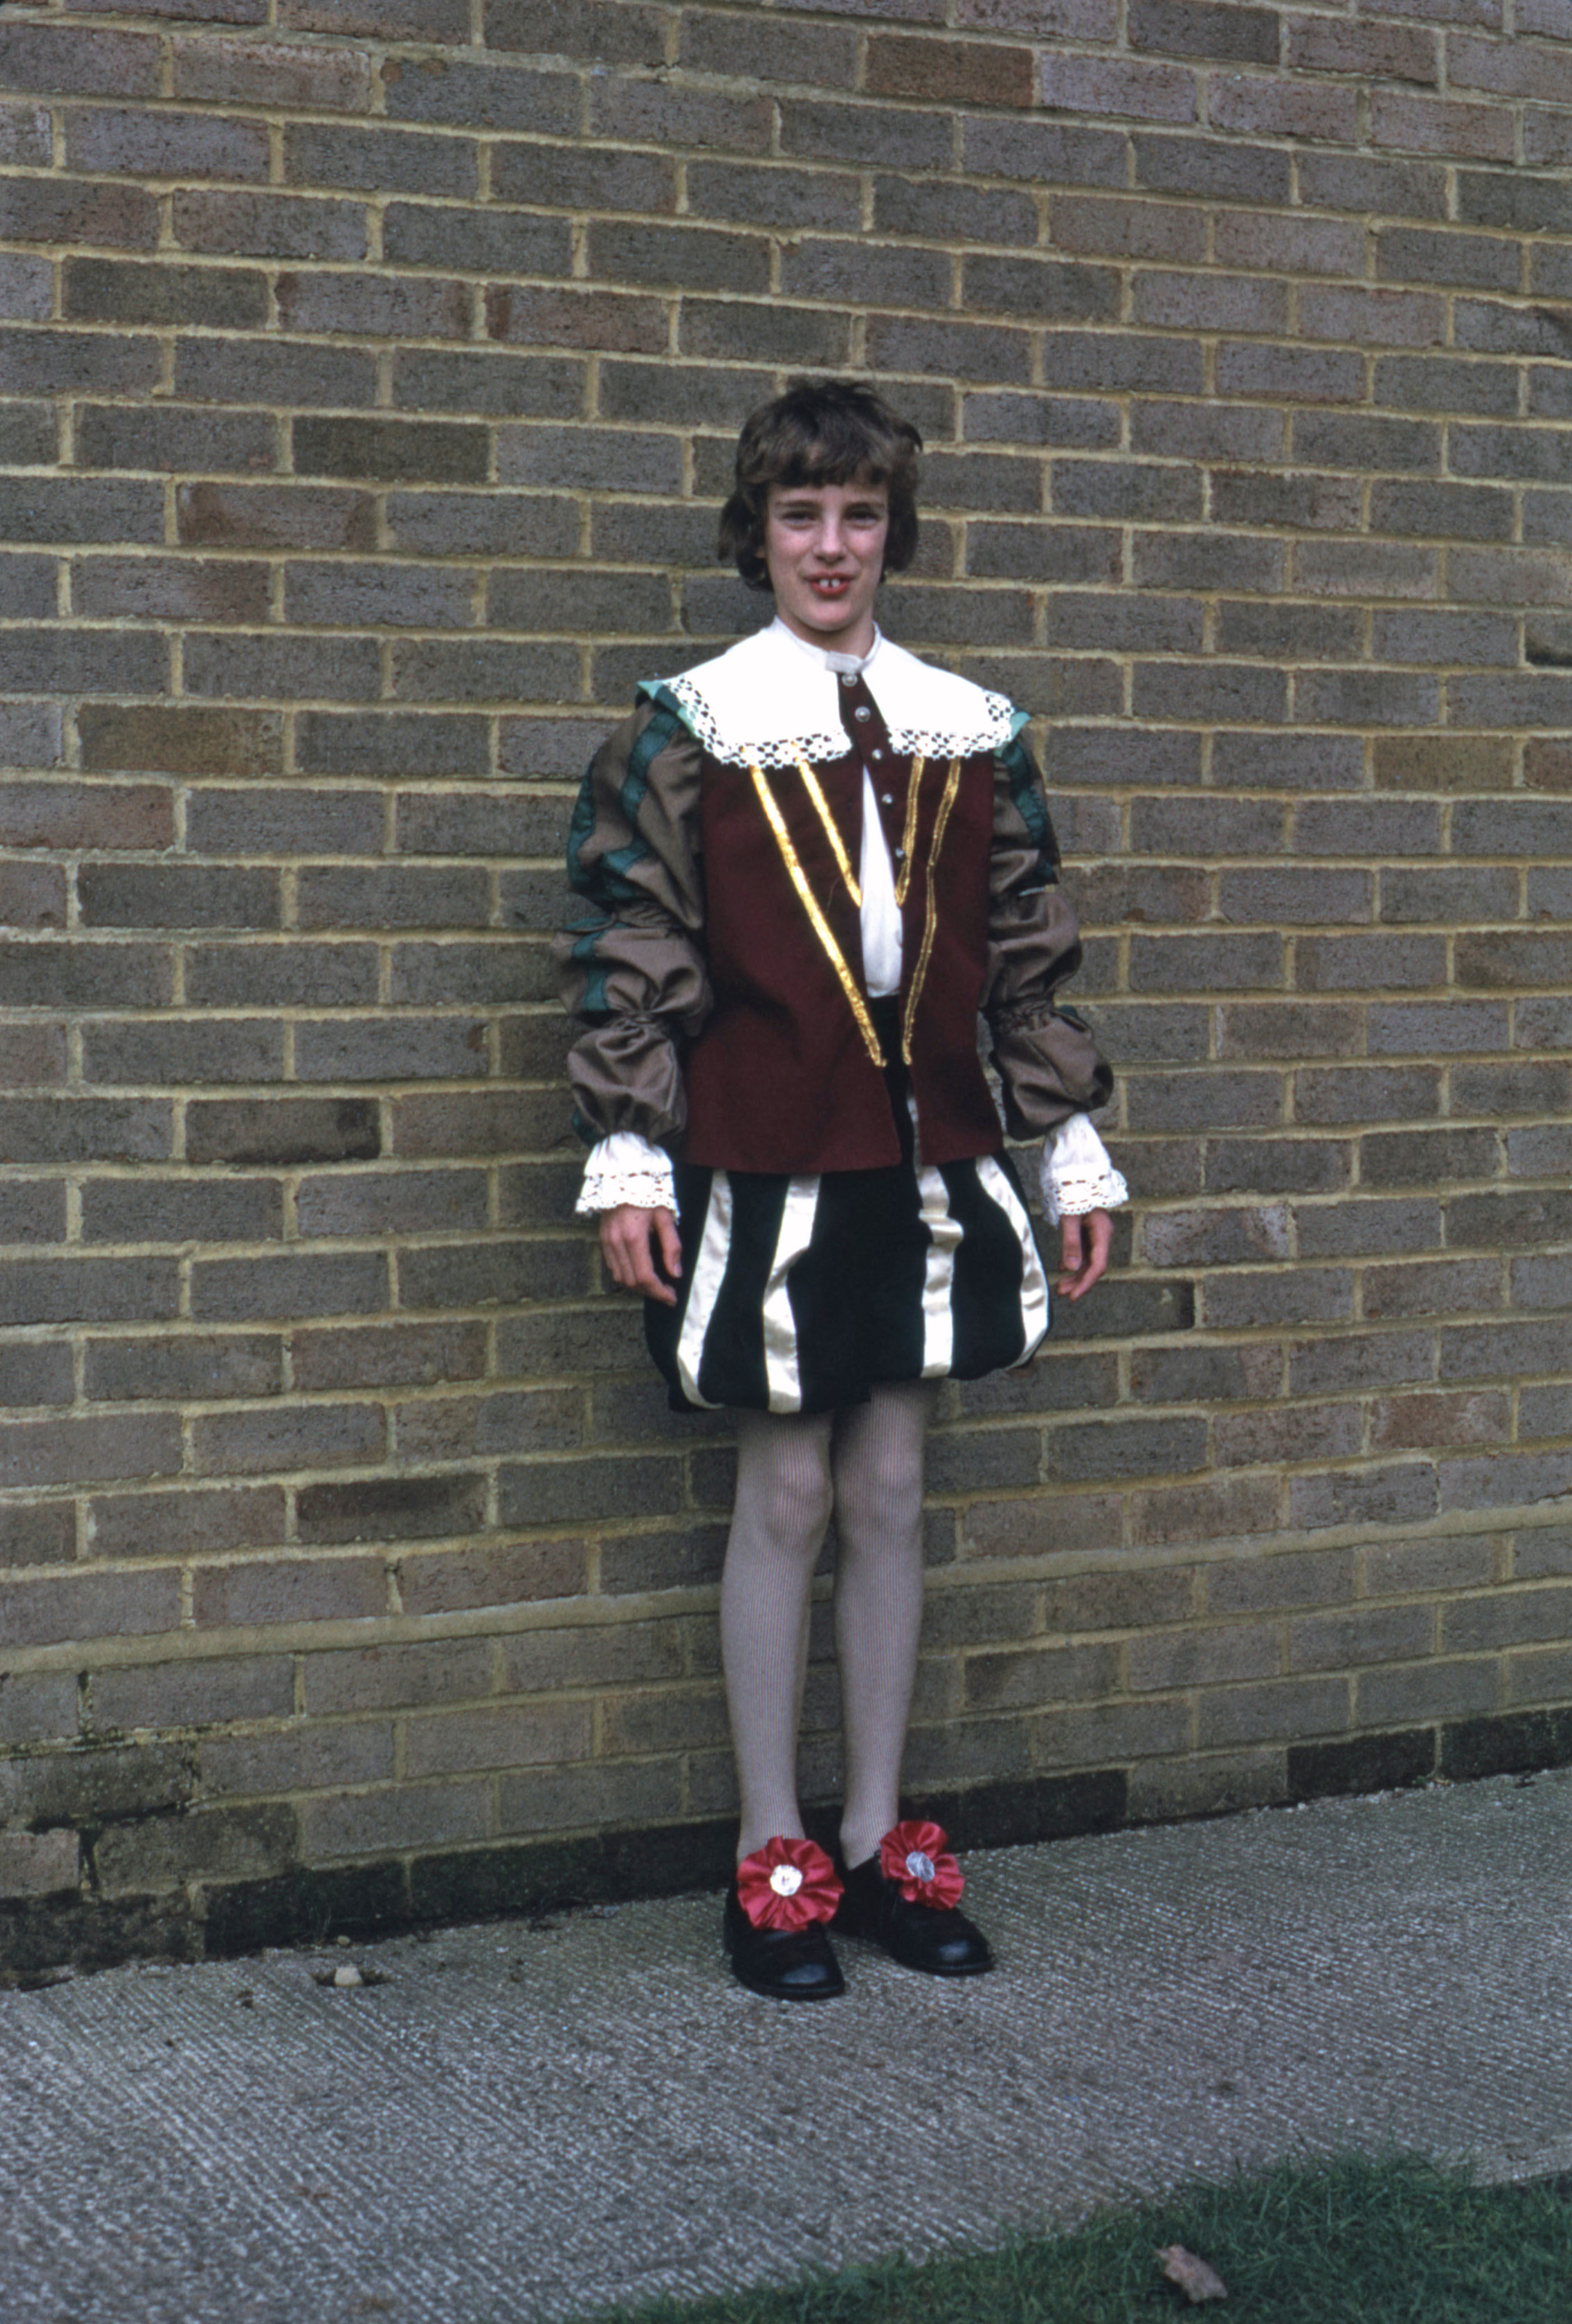 7504725 March 1975 - This time Simon is in the full costume.